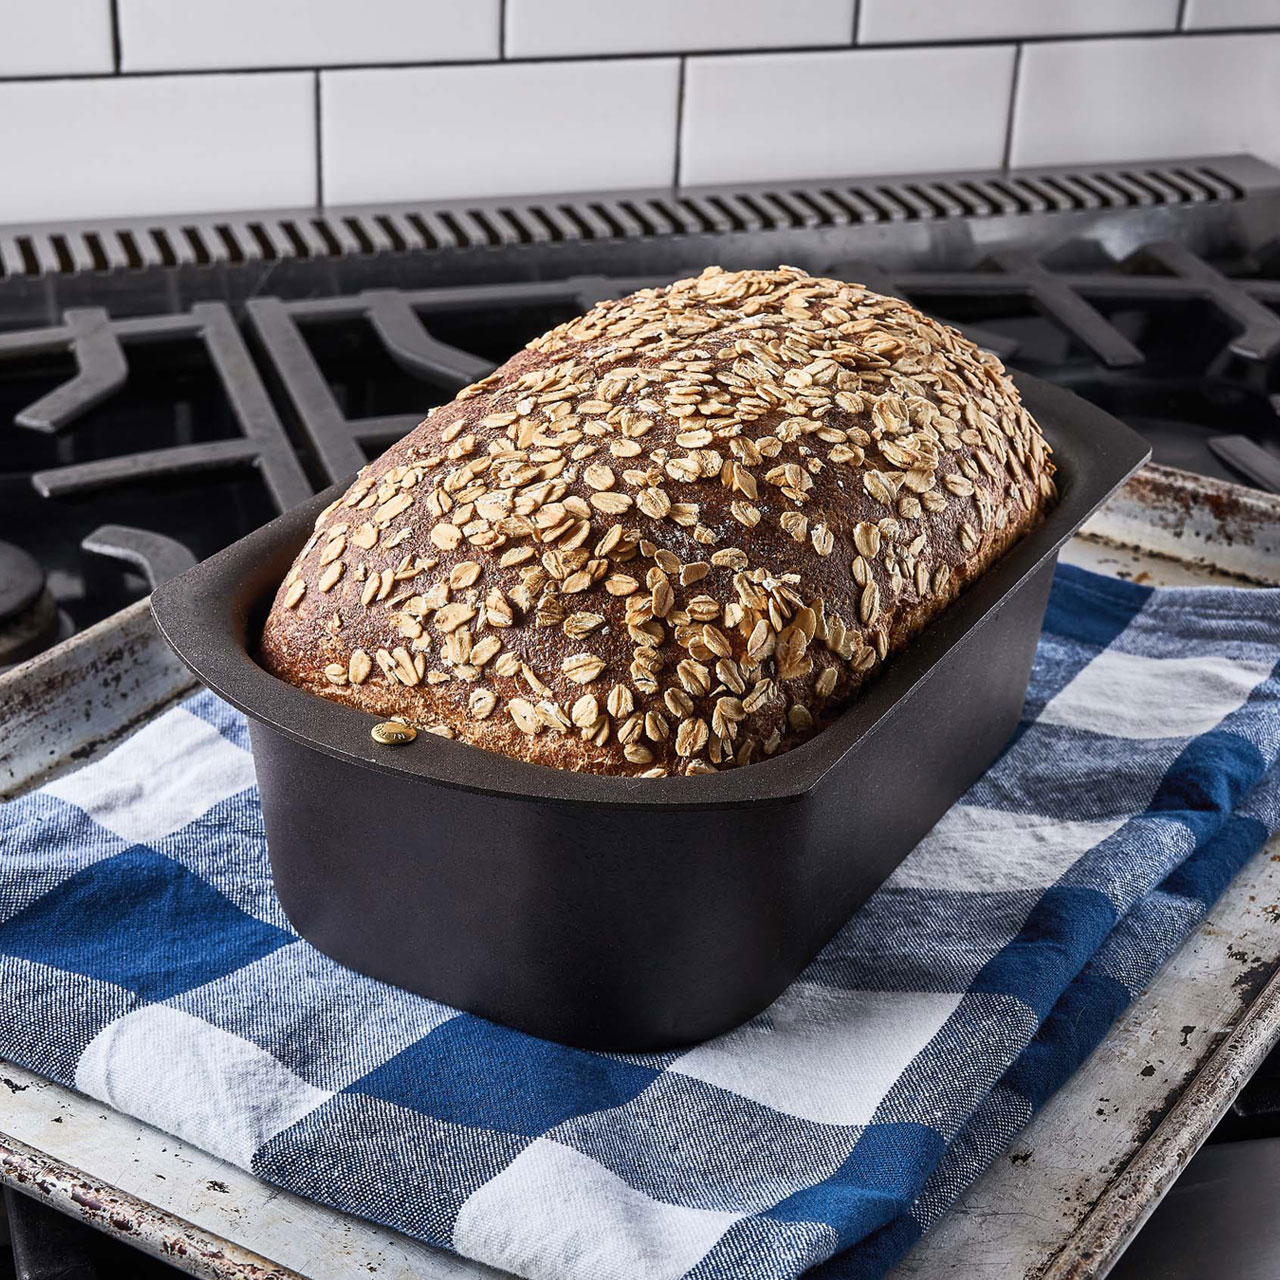 Large Heavy Duty Cast Iron Bread & Loaf Pan - a Perfect Way for Baking